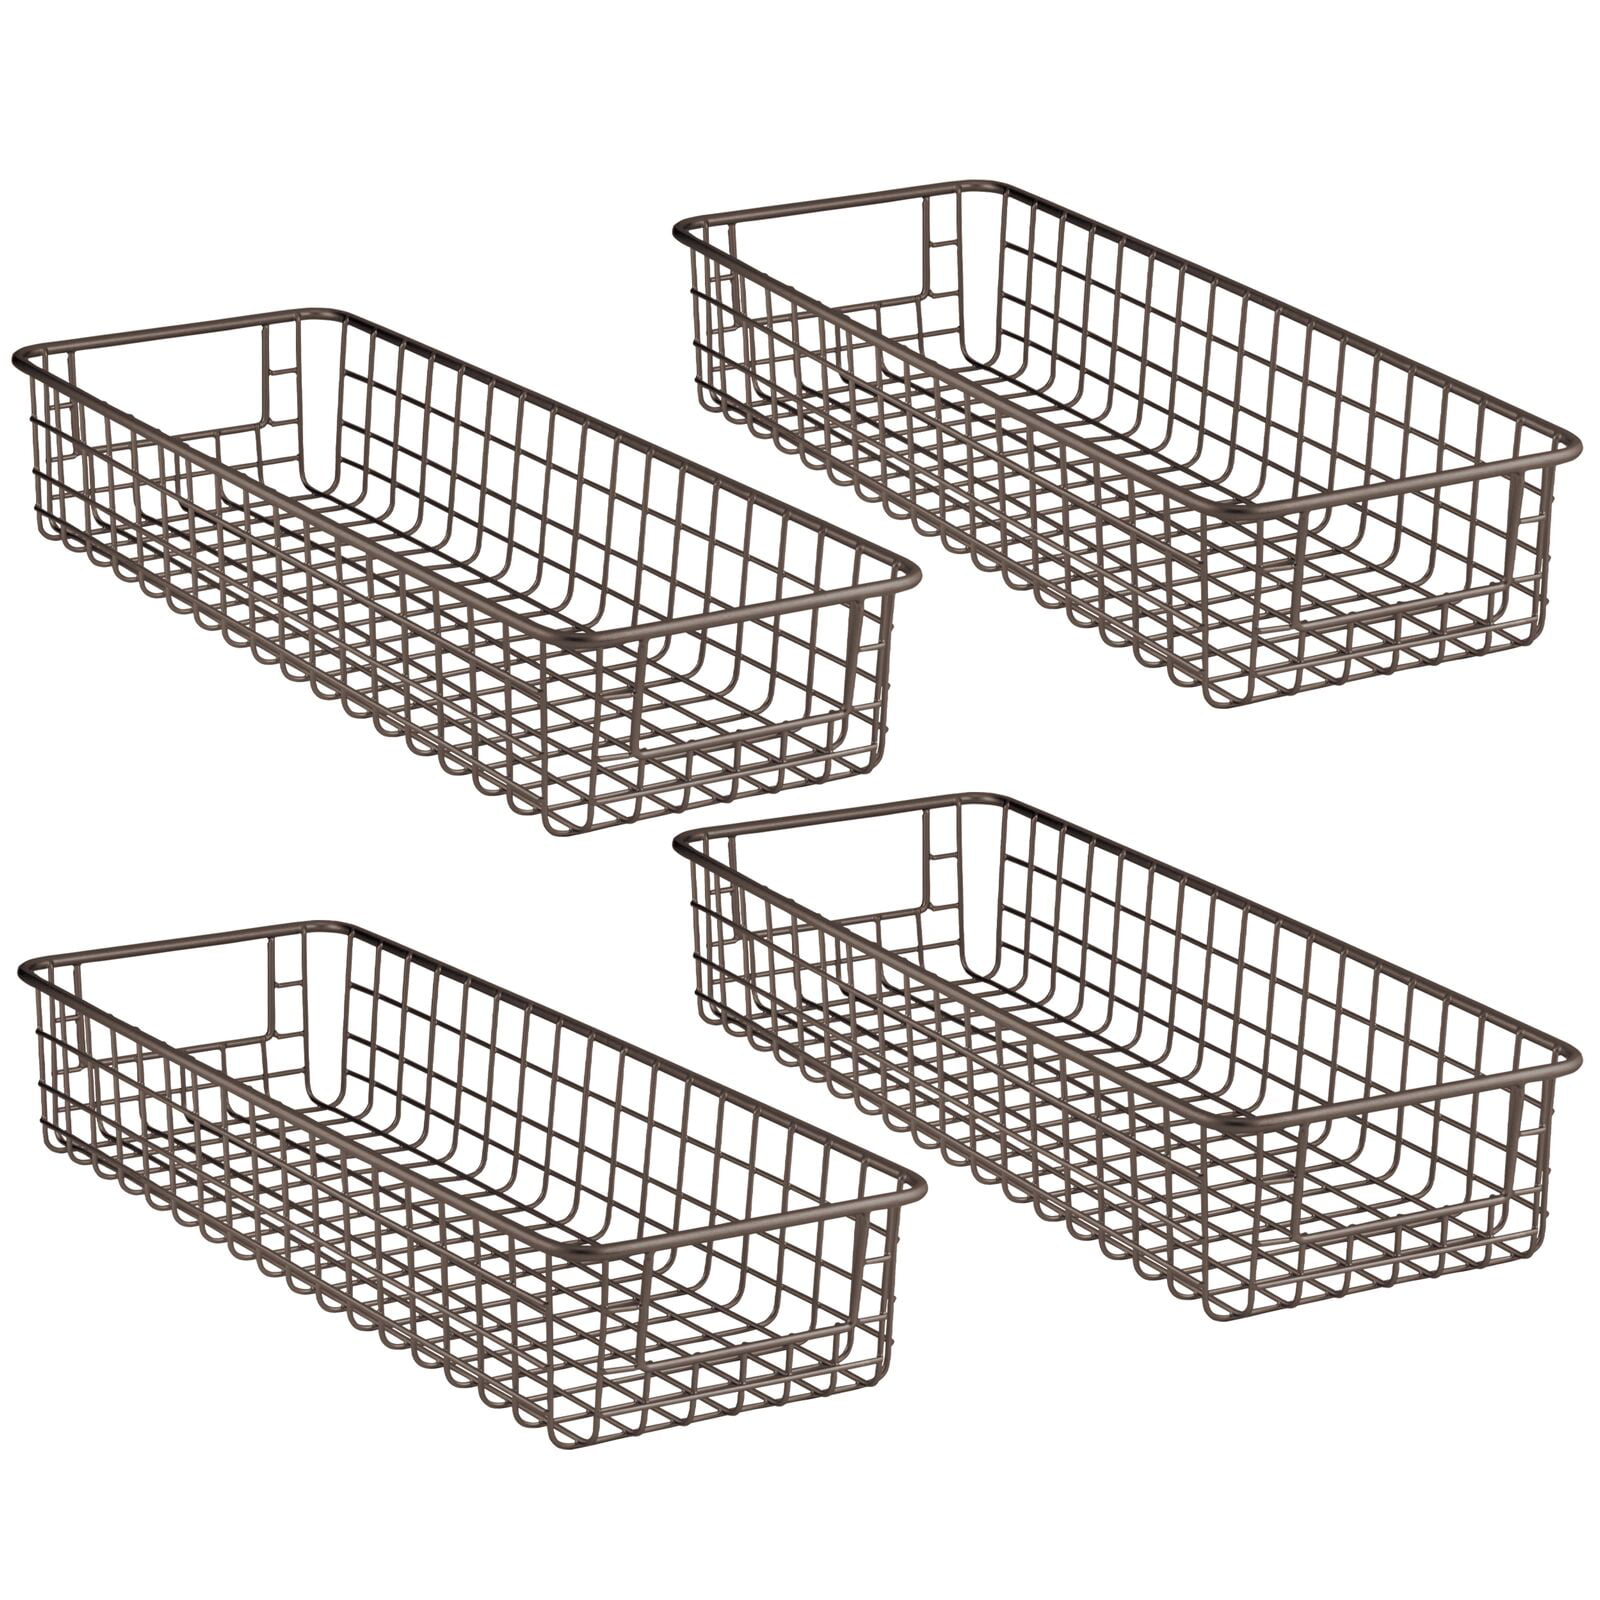 and More! mDesign Set of 2 Kitchen Storage Basket Practical Kitchen Accessories for Easy Storing -Wall-Mounted Wire Hanging Basket Suitable for Tin Foil Wax Paper Chrome 